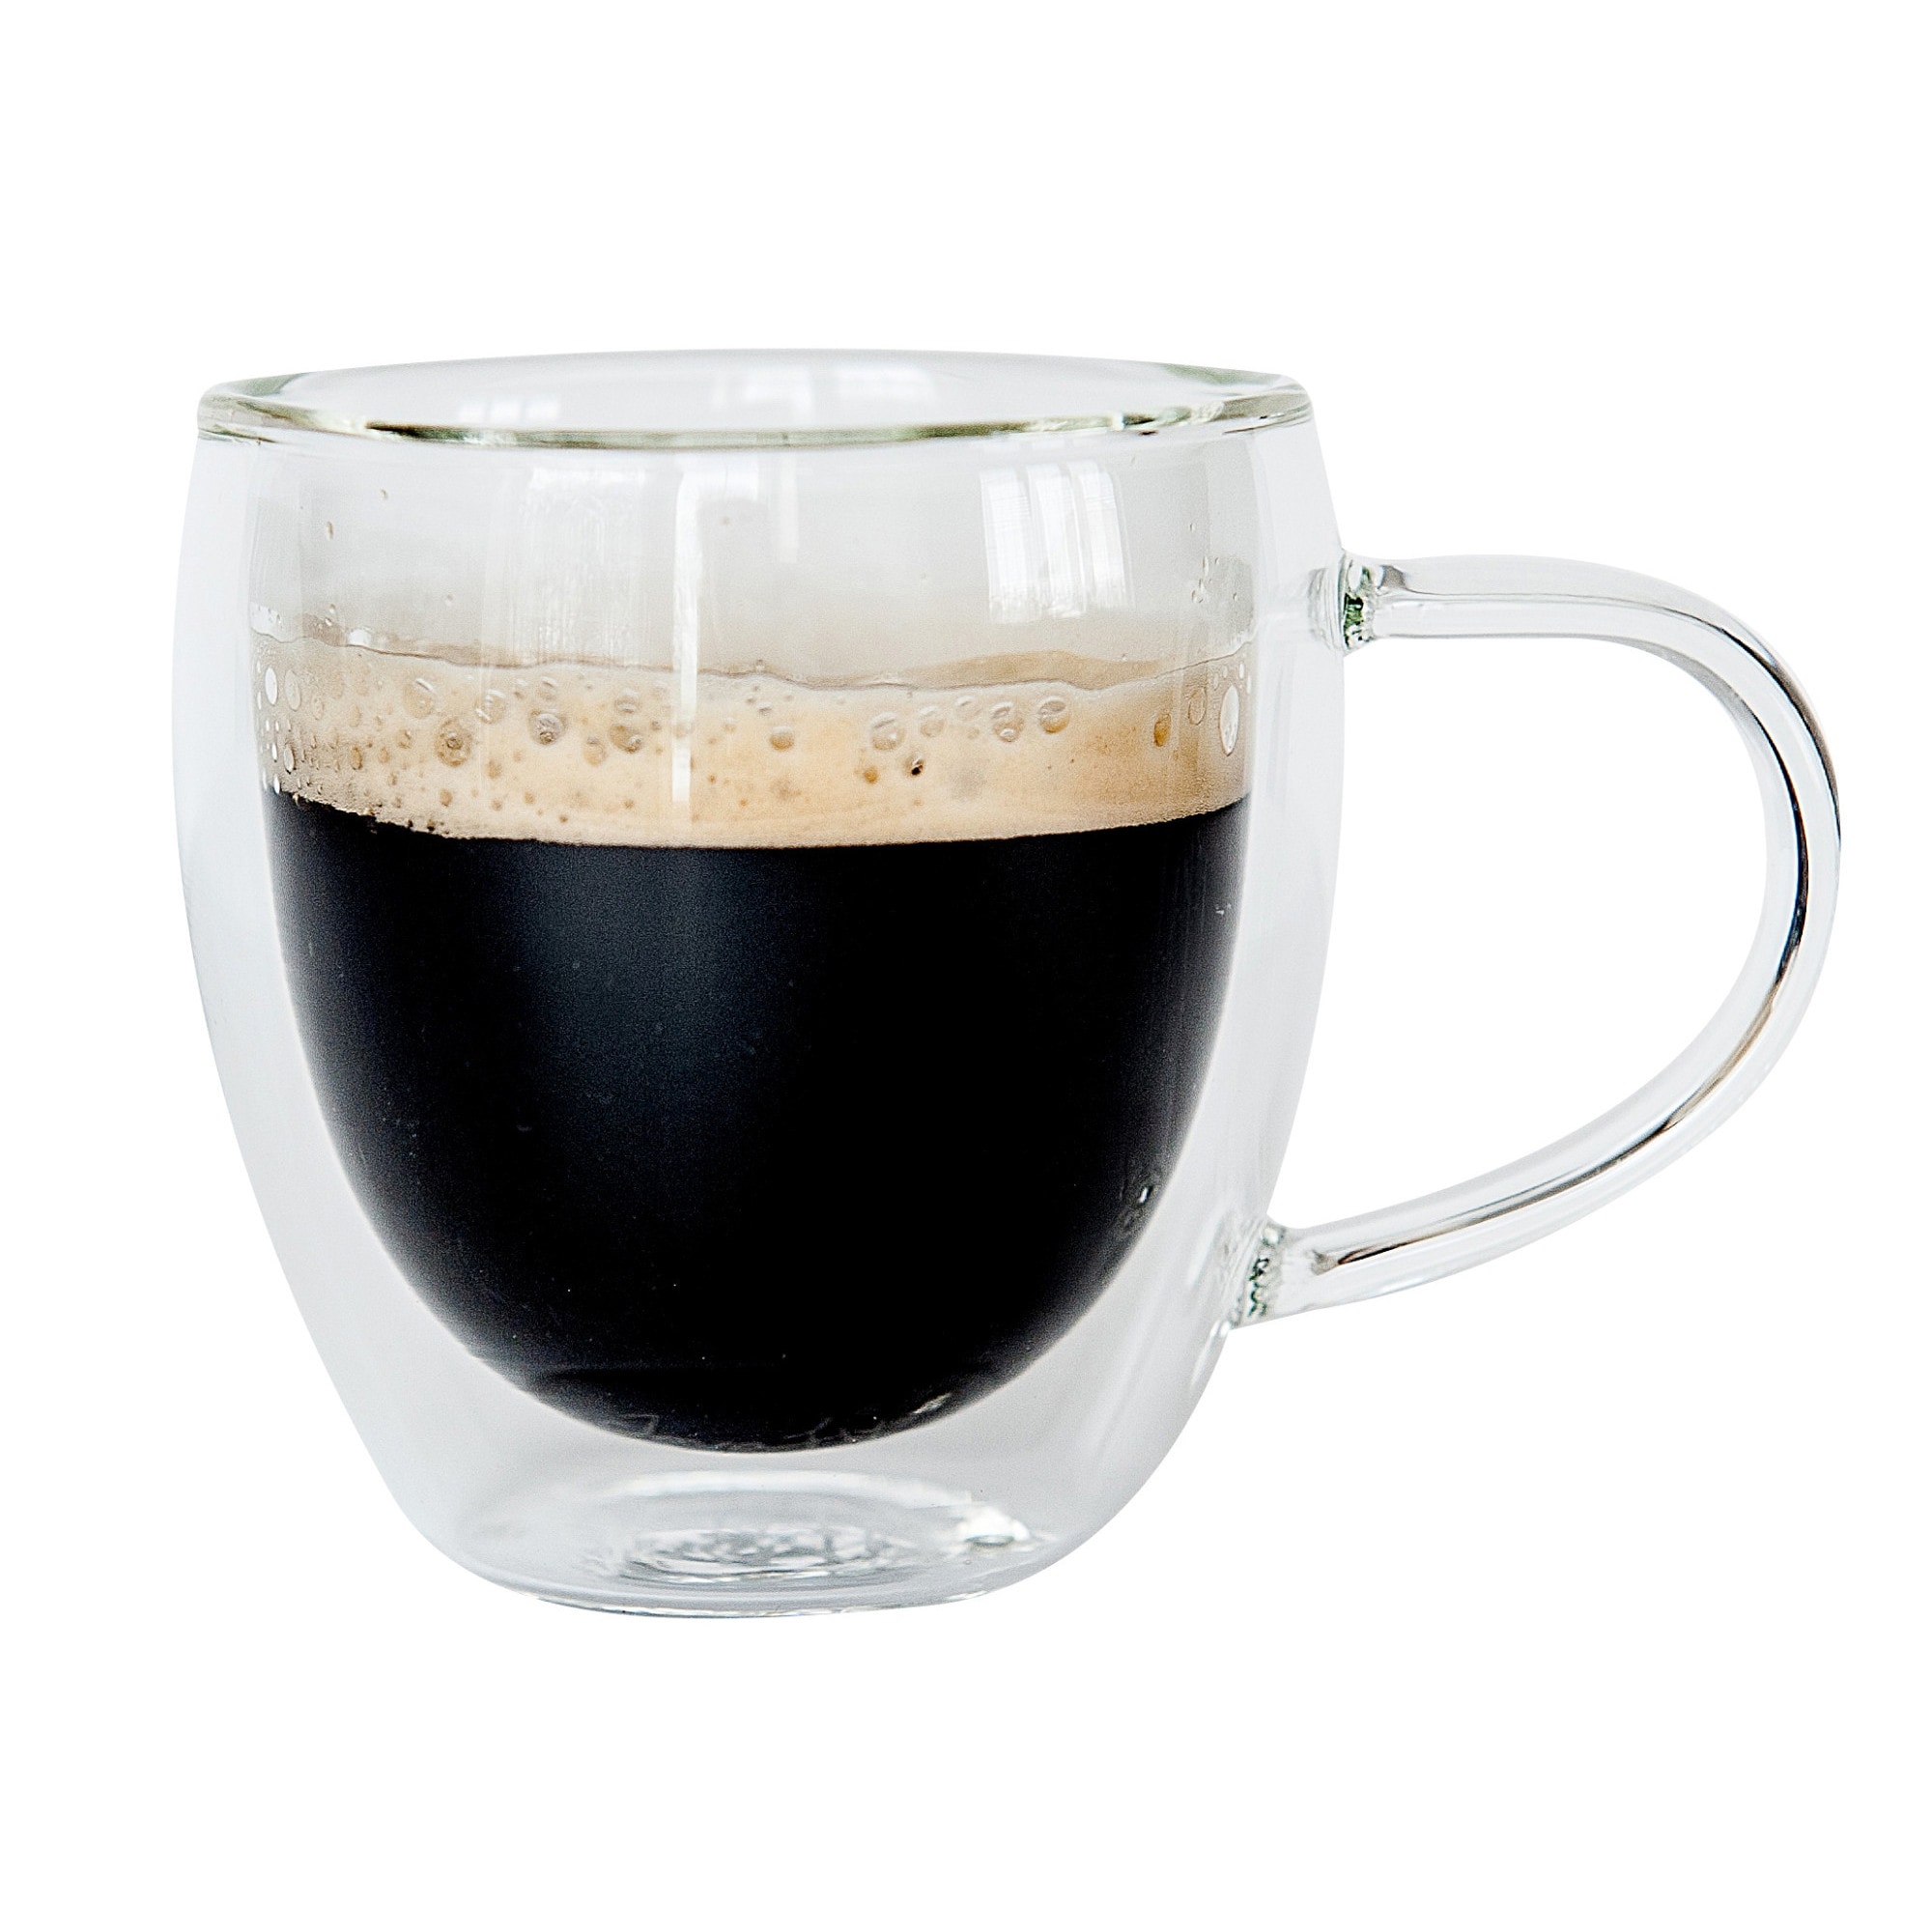 https://ak1.ostkcdn.com/images/products/19744138/Bistro-Mug-with-Handle-from-JavaFly-Double-Walled-Clear-Thermo-Glass-Cup-4oz-Set-of-4-95fea95b-2a9e-48e0-96b1-0d9afee1297c.jpg